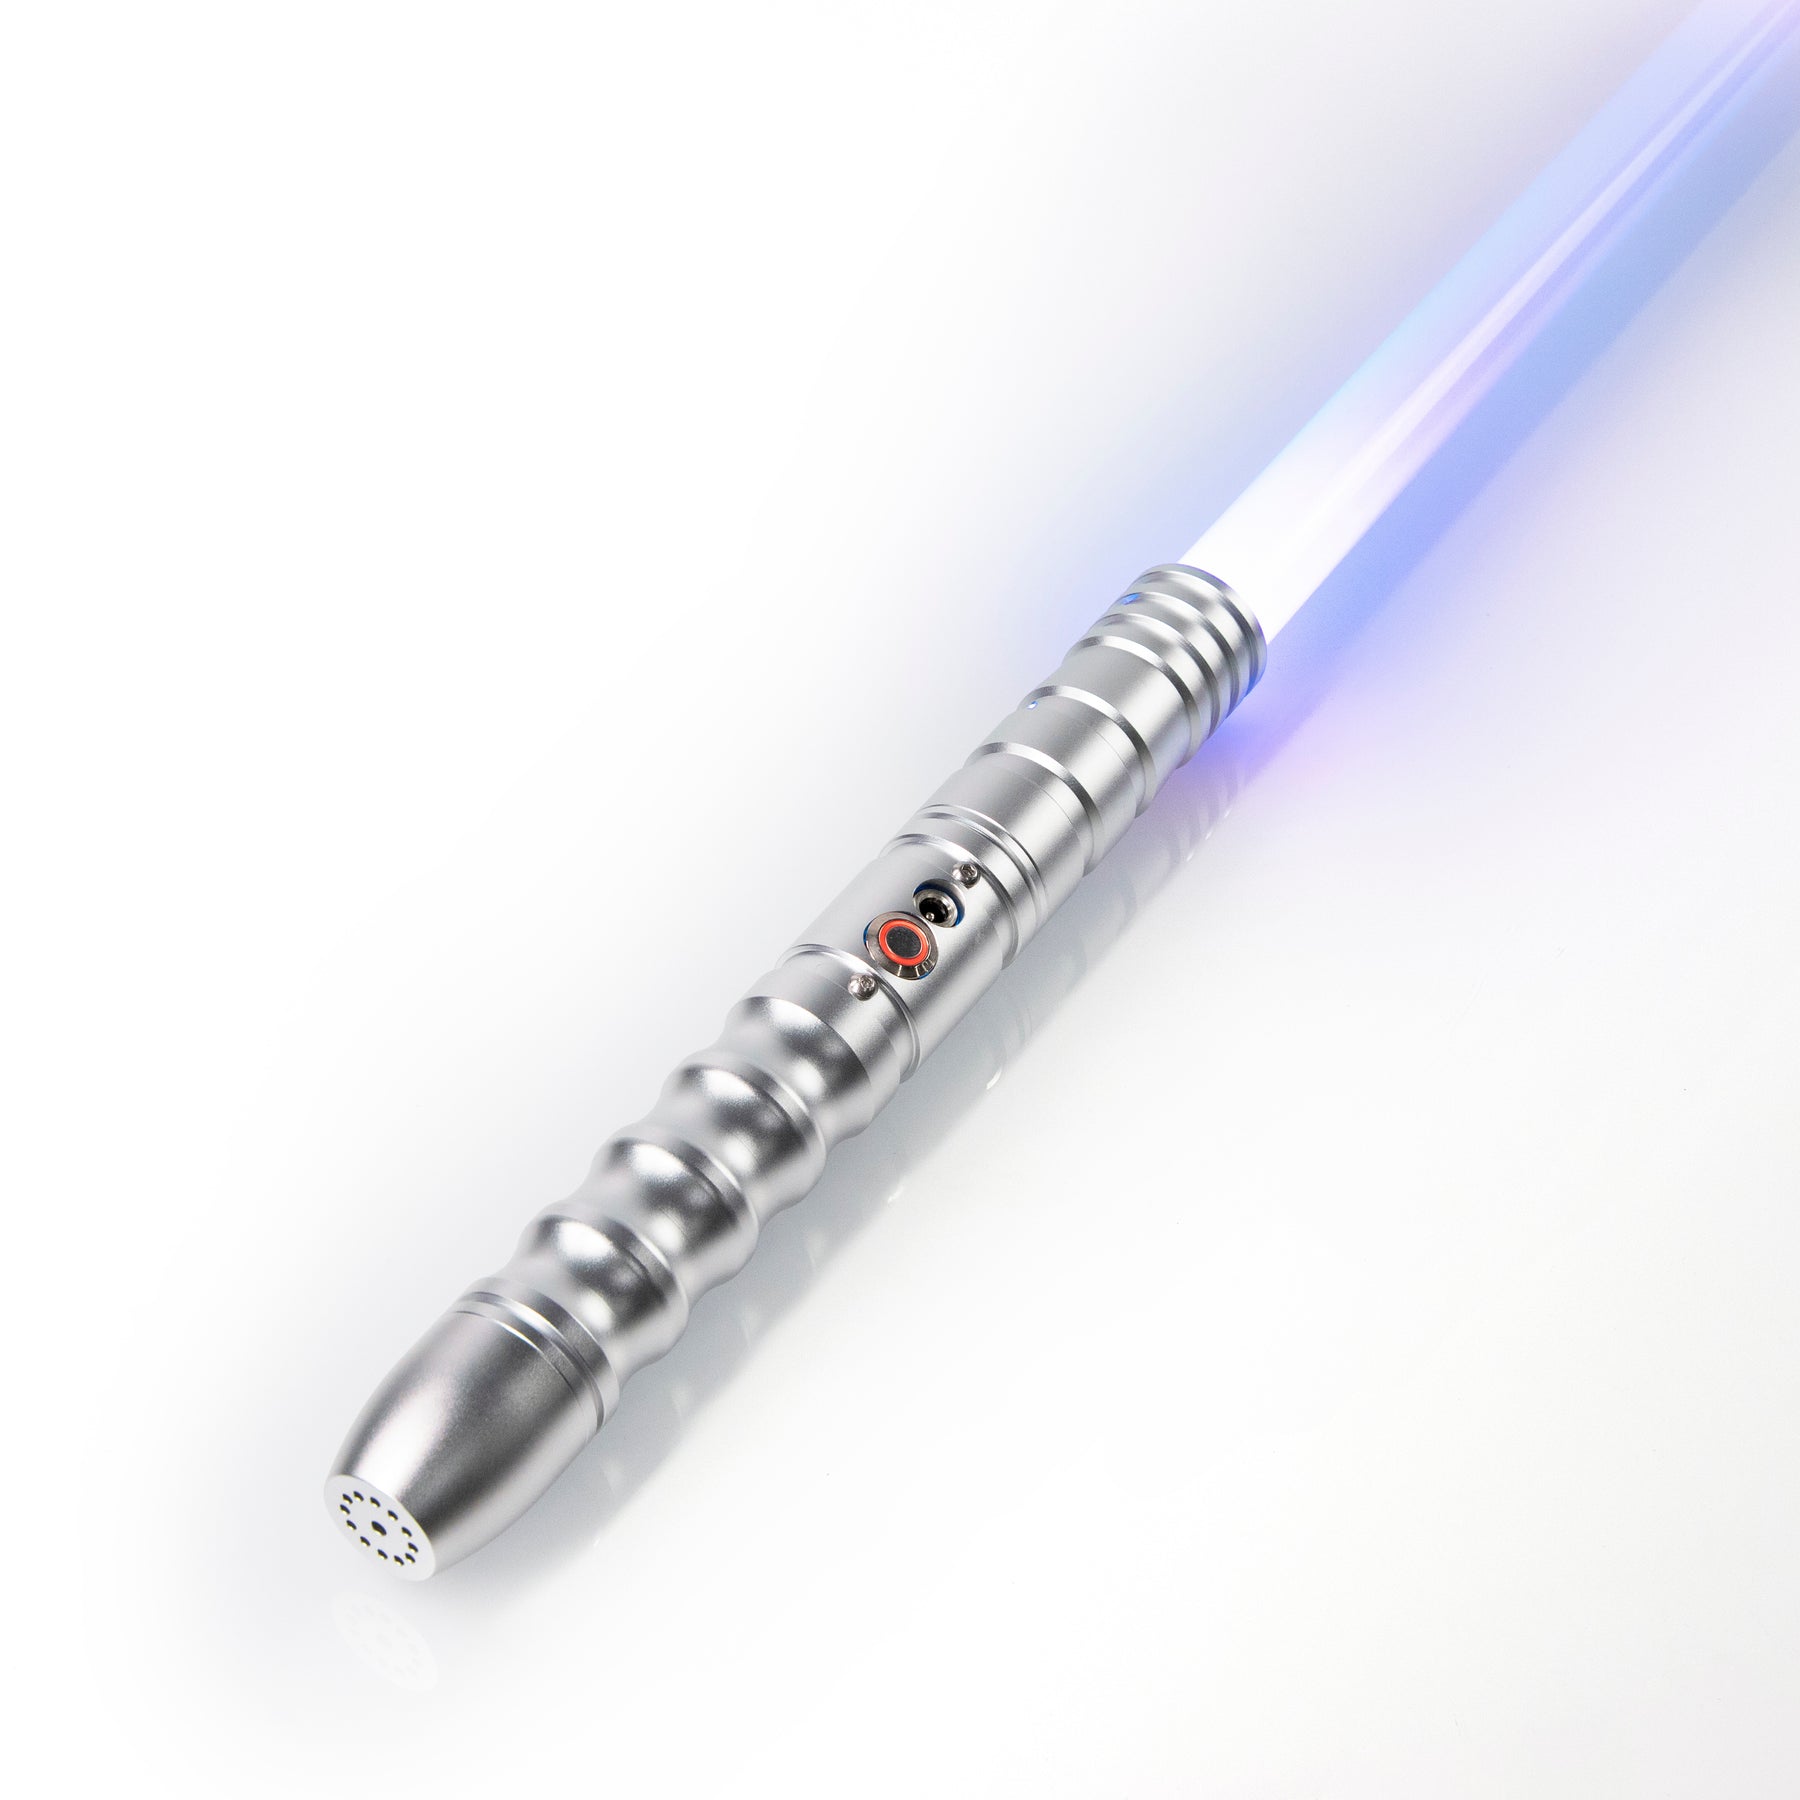 SaberCustom heavy dueling lightsaber fx smooth swing 9 sound fonts infinite color changing NO111